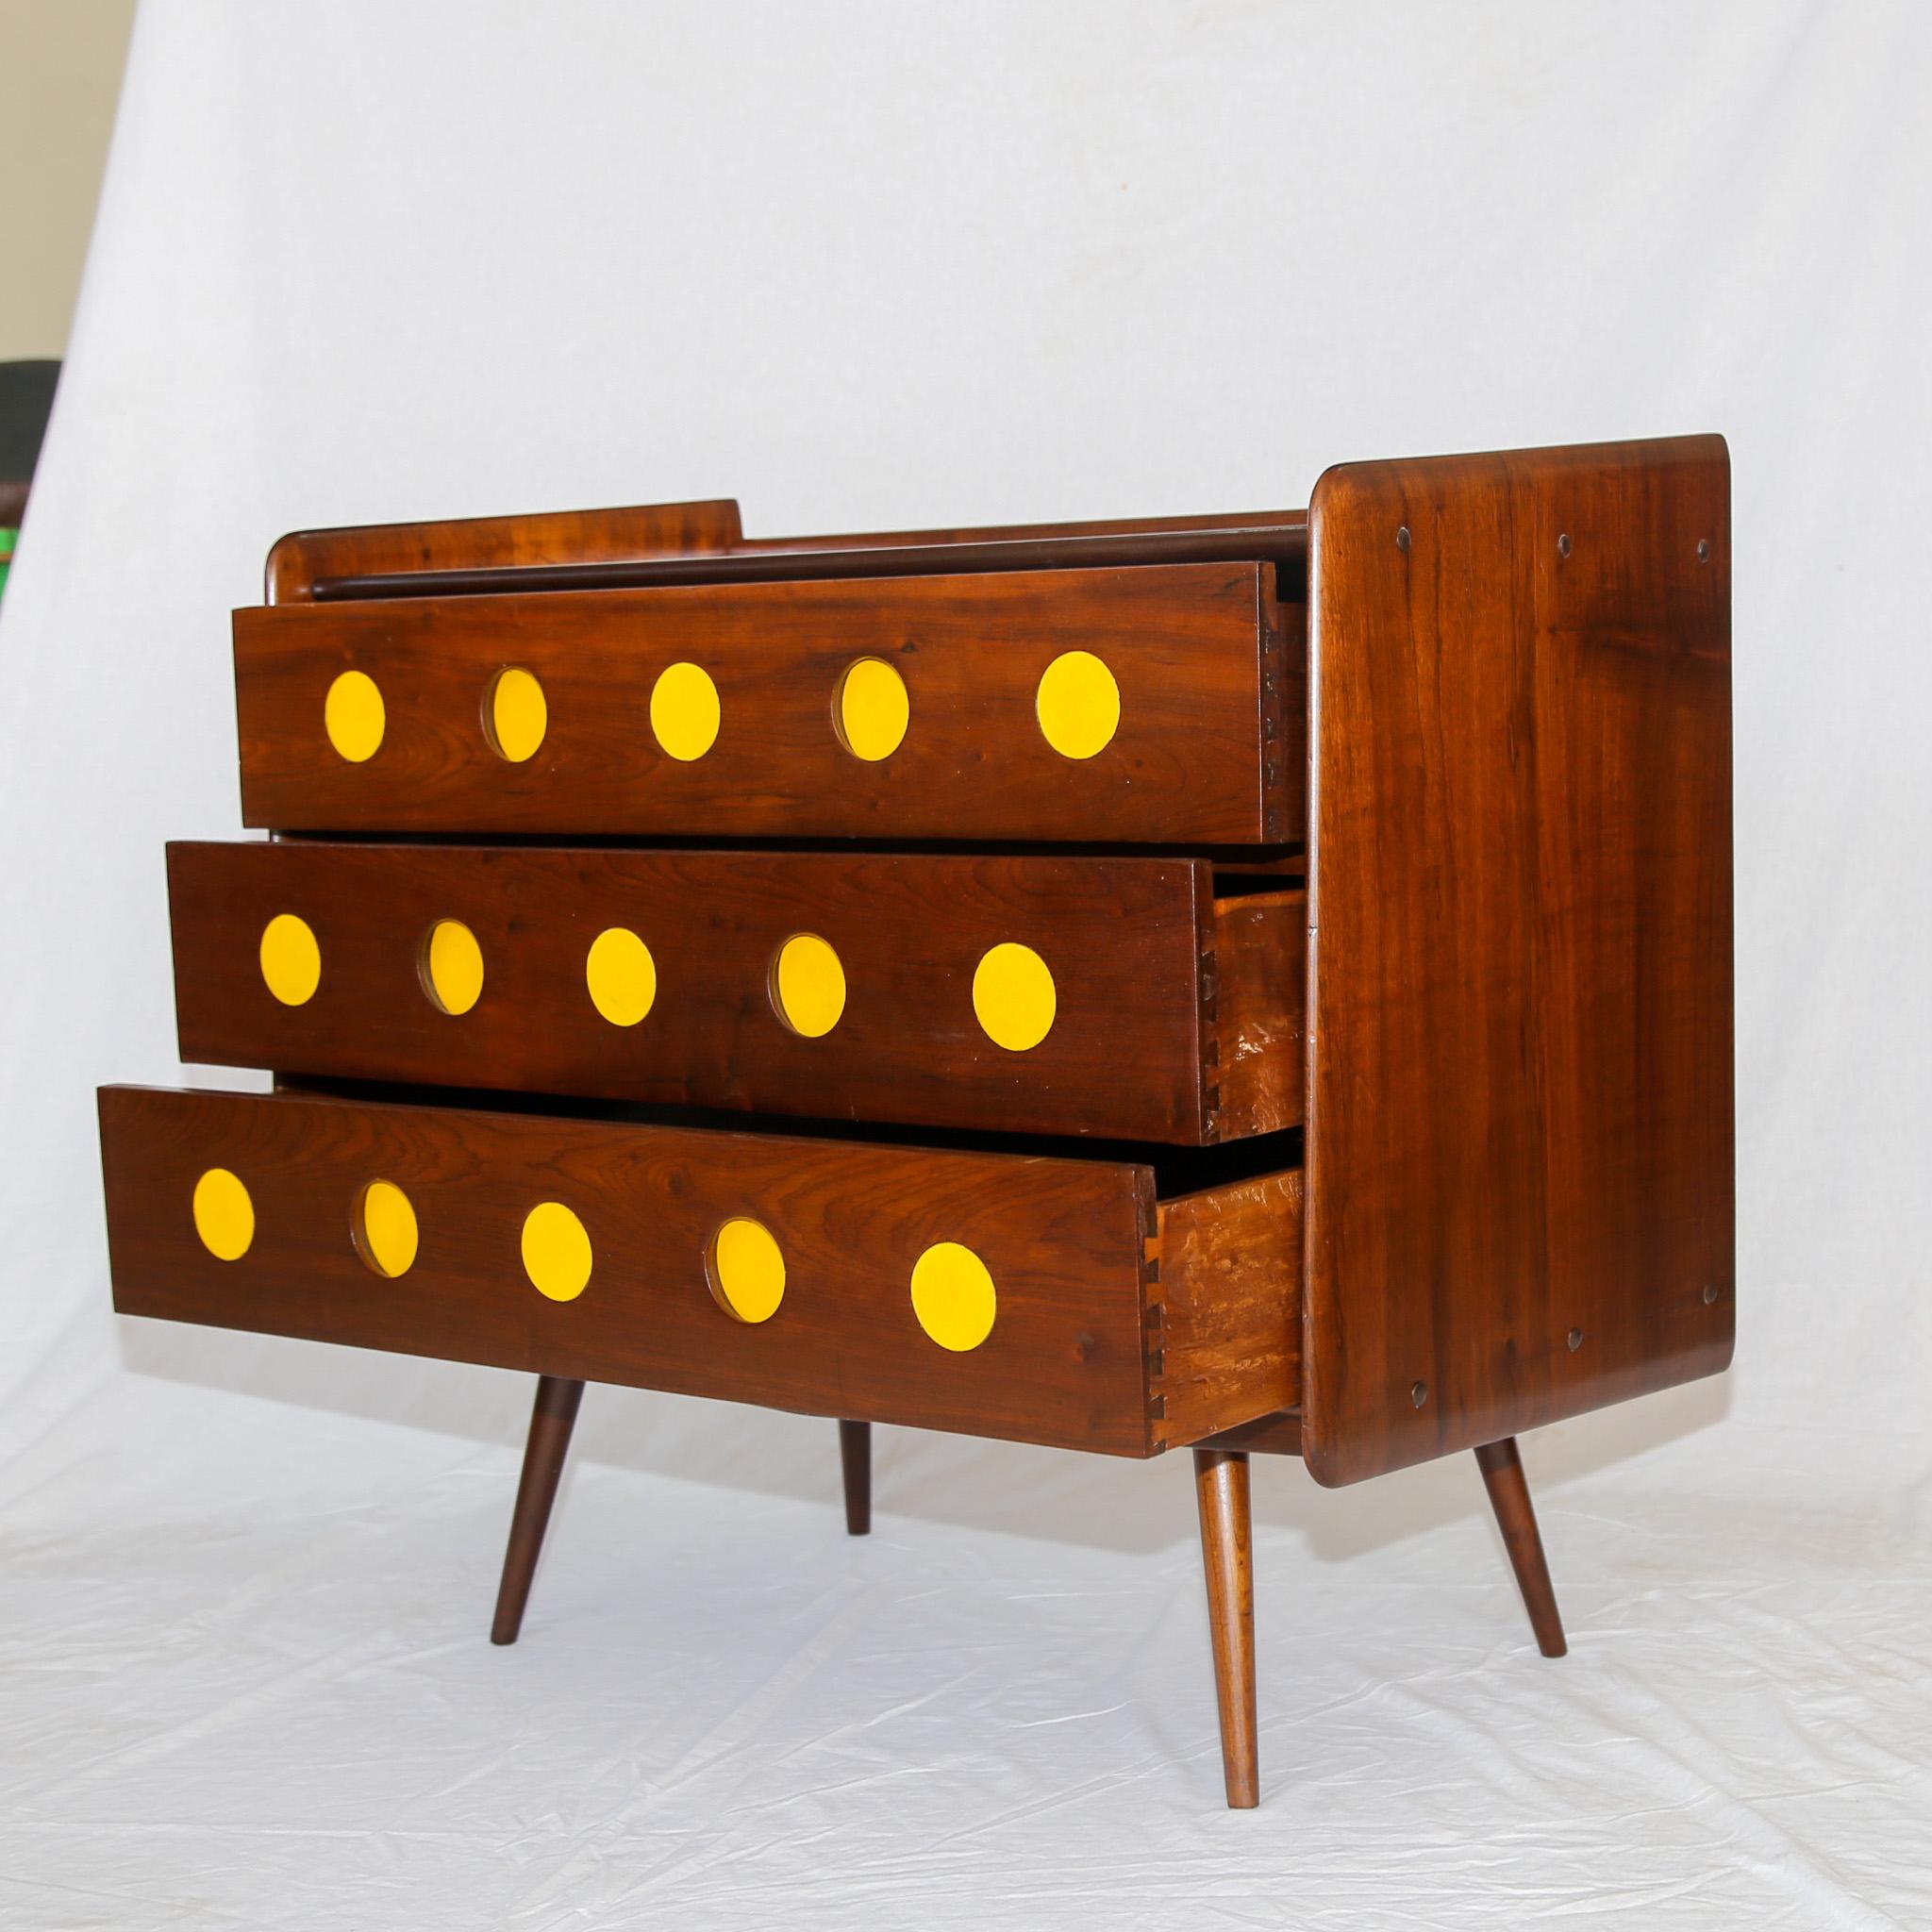 Mid-Century Modern Brazilian Modern Chest of Drawers in Hardwood by Moveis Cimo, 1950s, Brazil